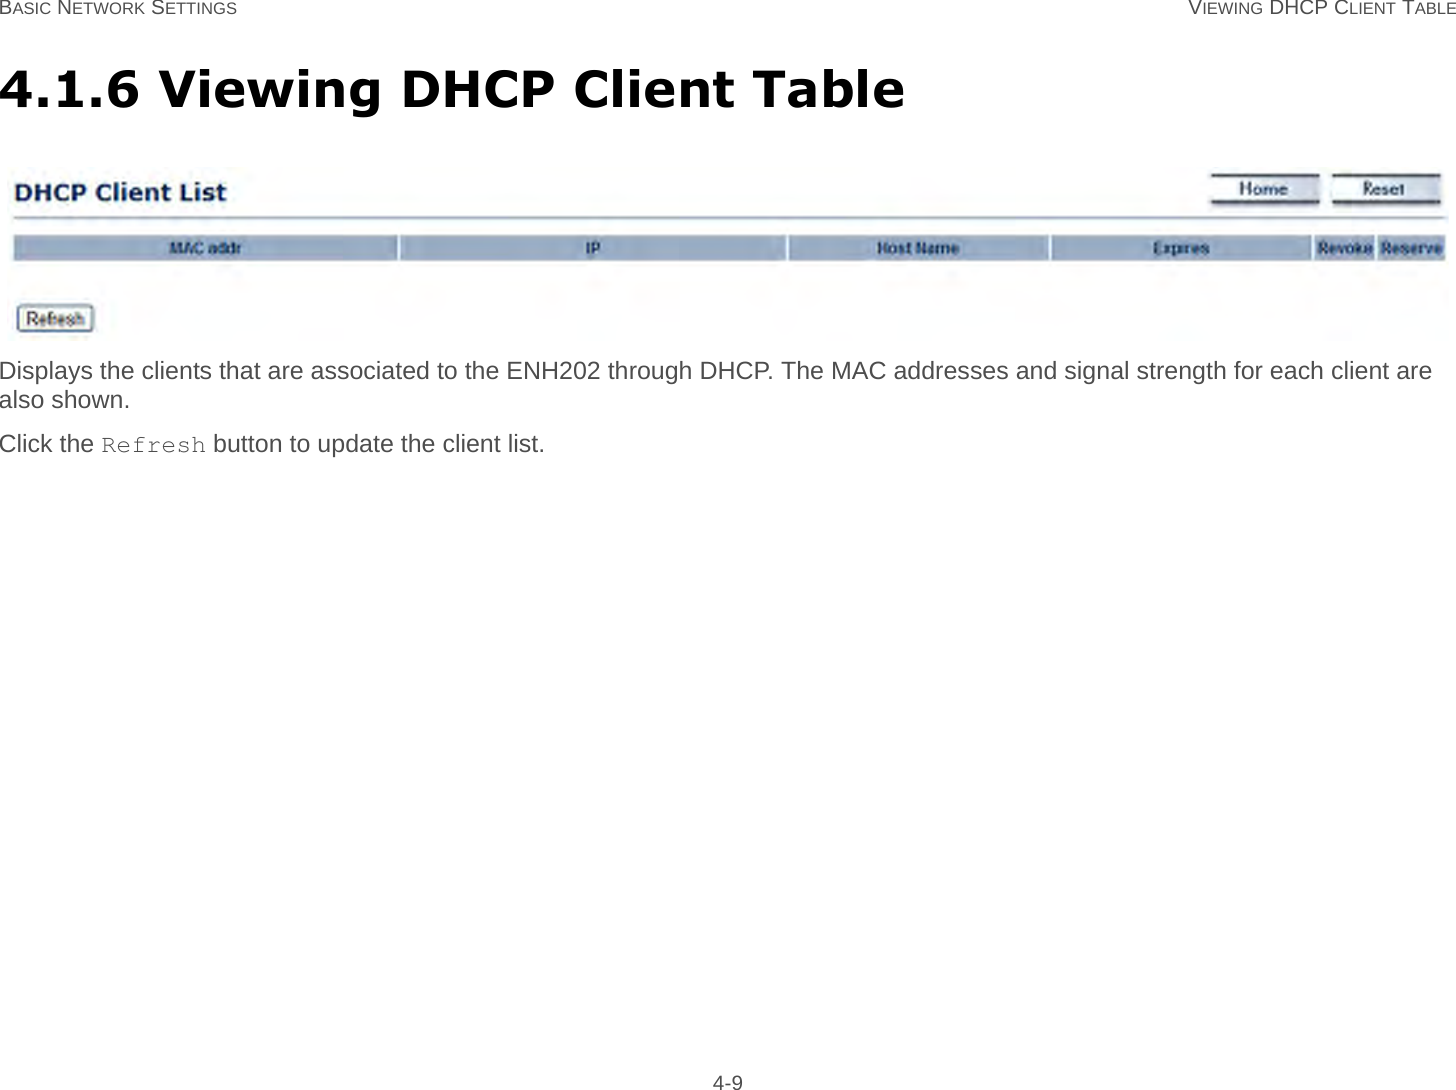 BASIC NETWORK SETTINGS VIEWING DHCP CLIENT TABLE 4-94.1.6 Viewing DHCP Client TableDisplays the clients that are associated to the ENH202 through DHCP. The MAC addresses and signal strength for each client are also shown.Click the Refresh button to update the client list.